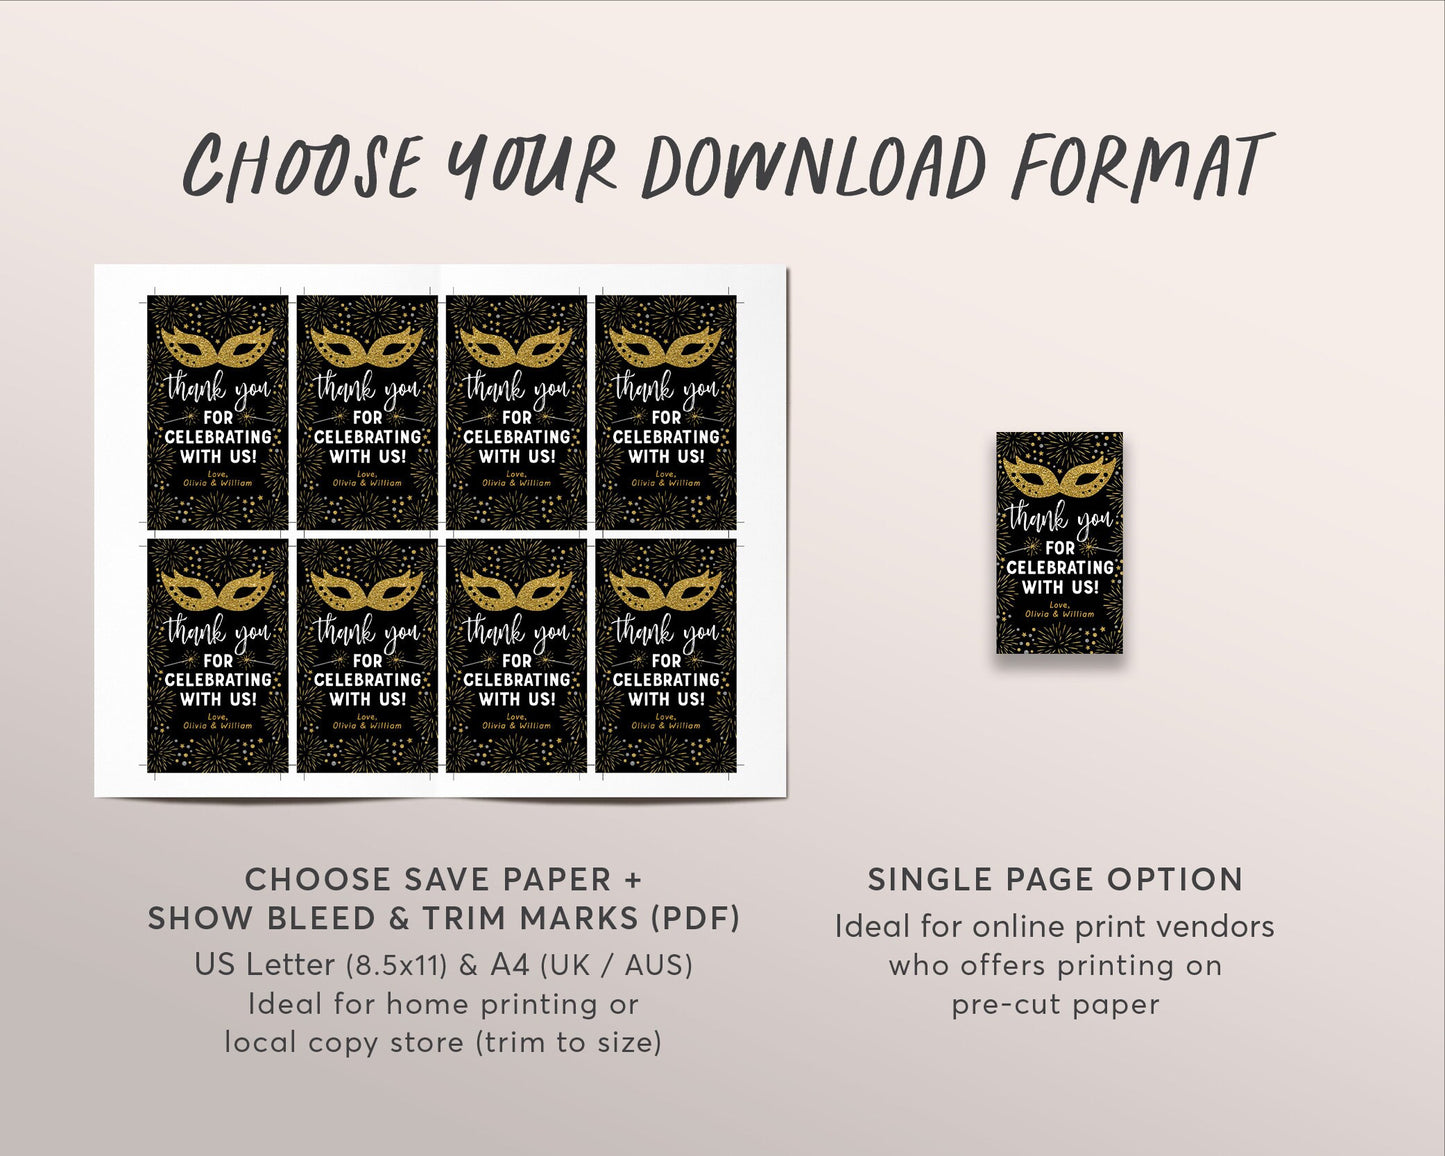 Masquerade Favor Tags Editable Template, Engagement Party Rehearsal Dinner Black And Gold Gift Tags Printable, Masquerade Ball Decor